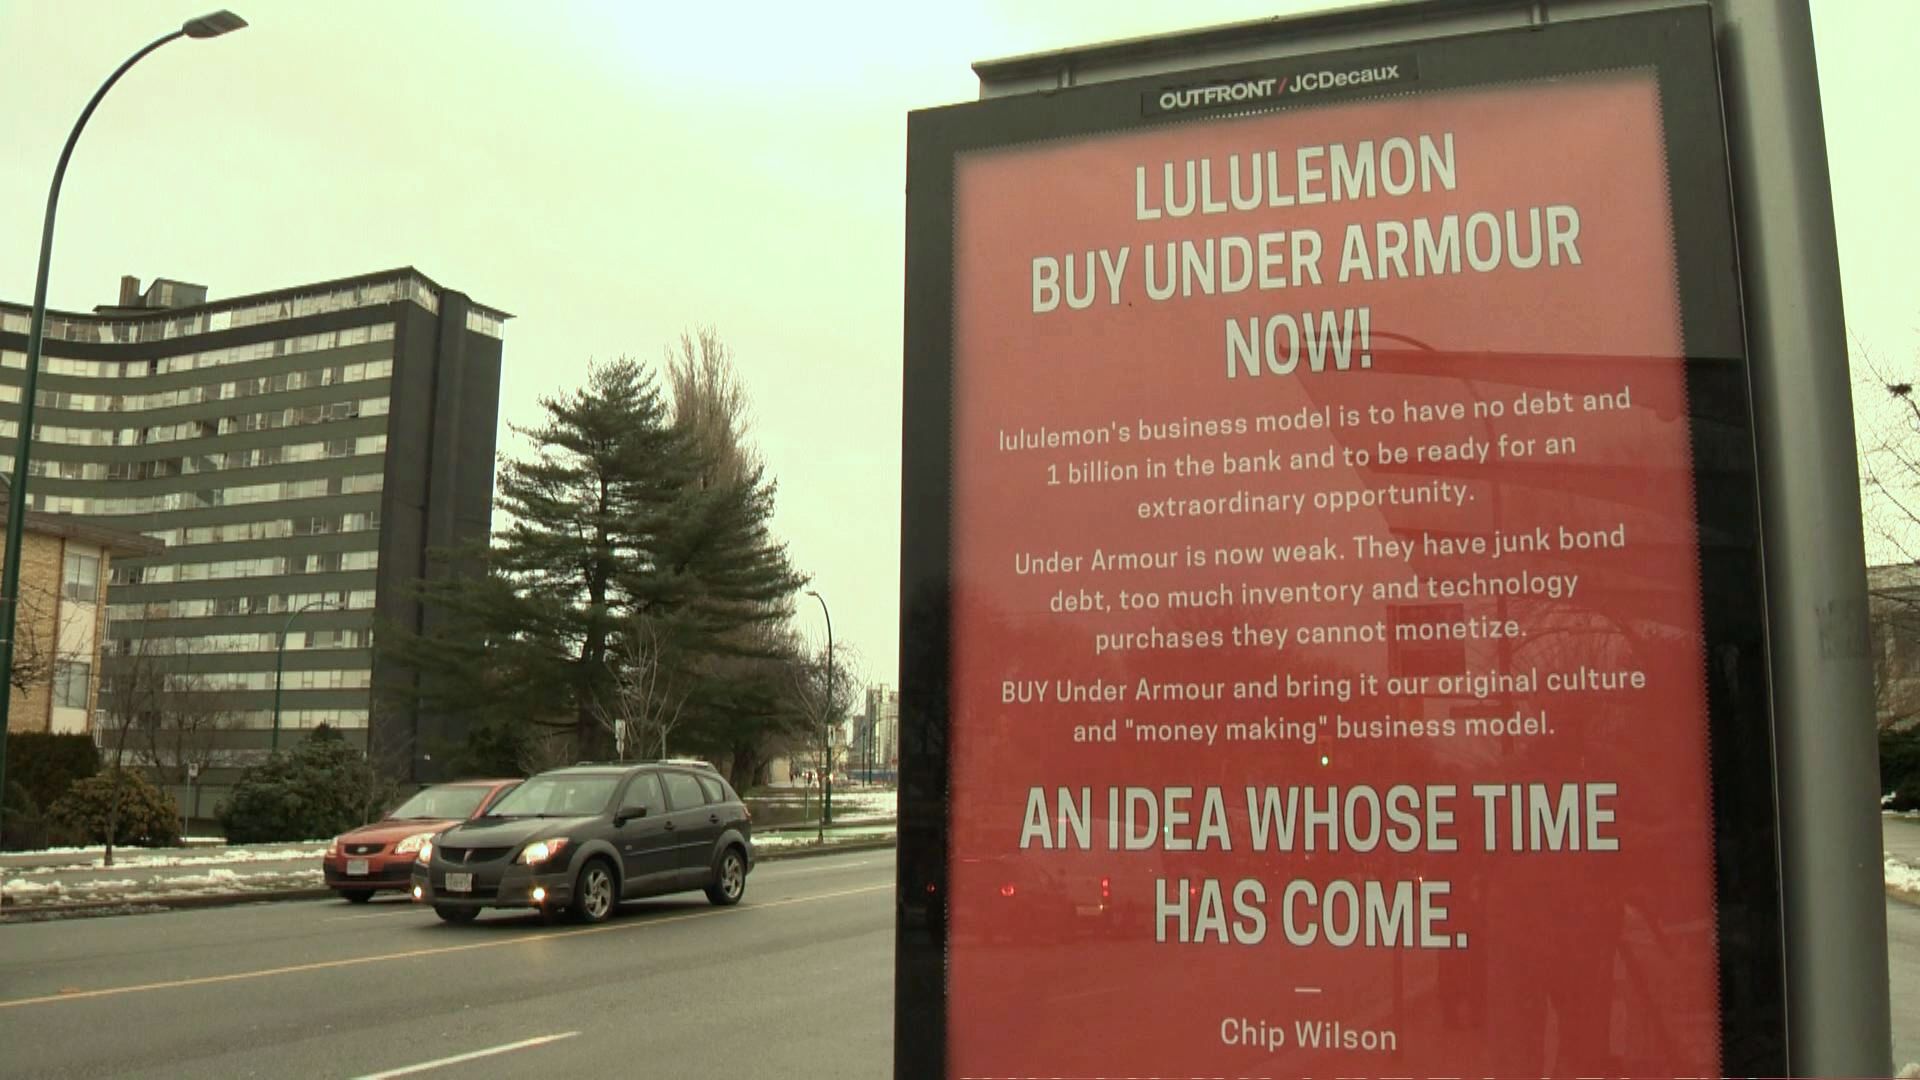 Chip Wilson urges Lululemon to buy Under Armour through bus stop